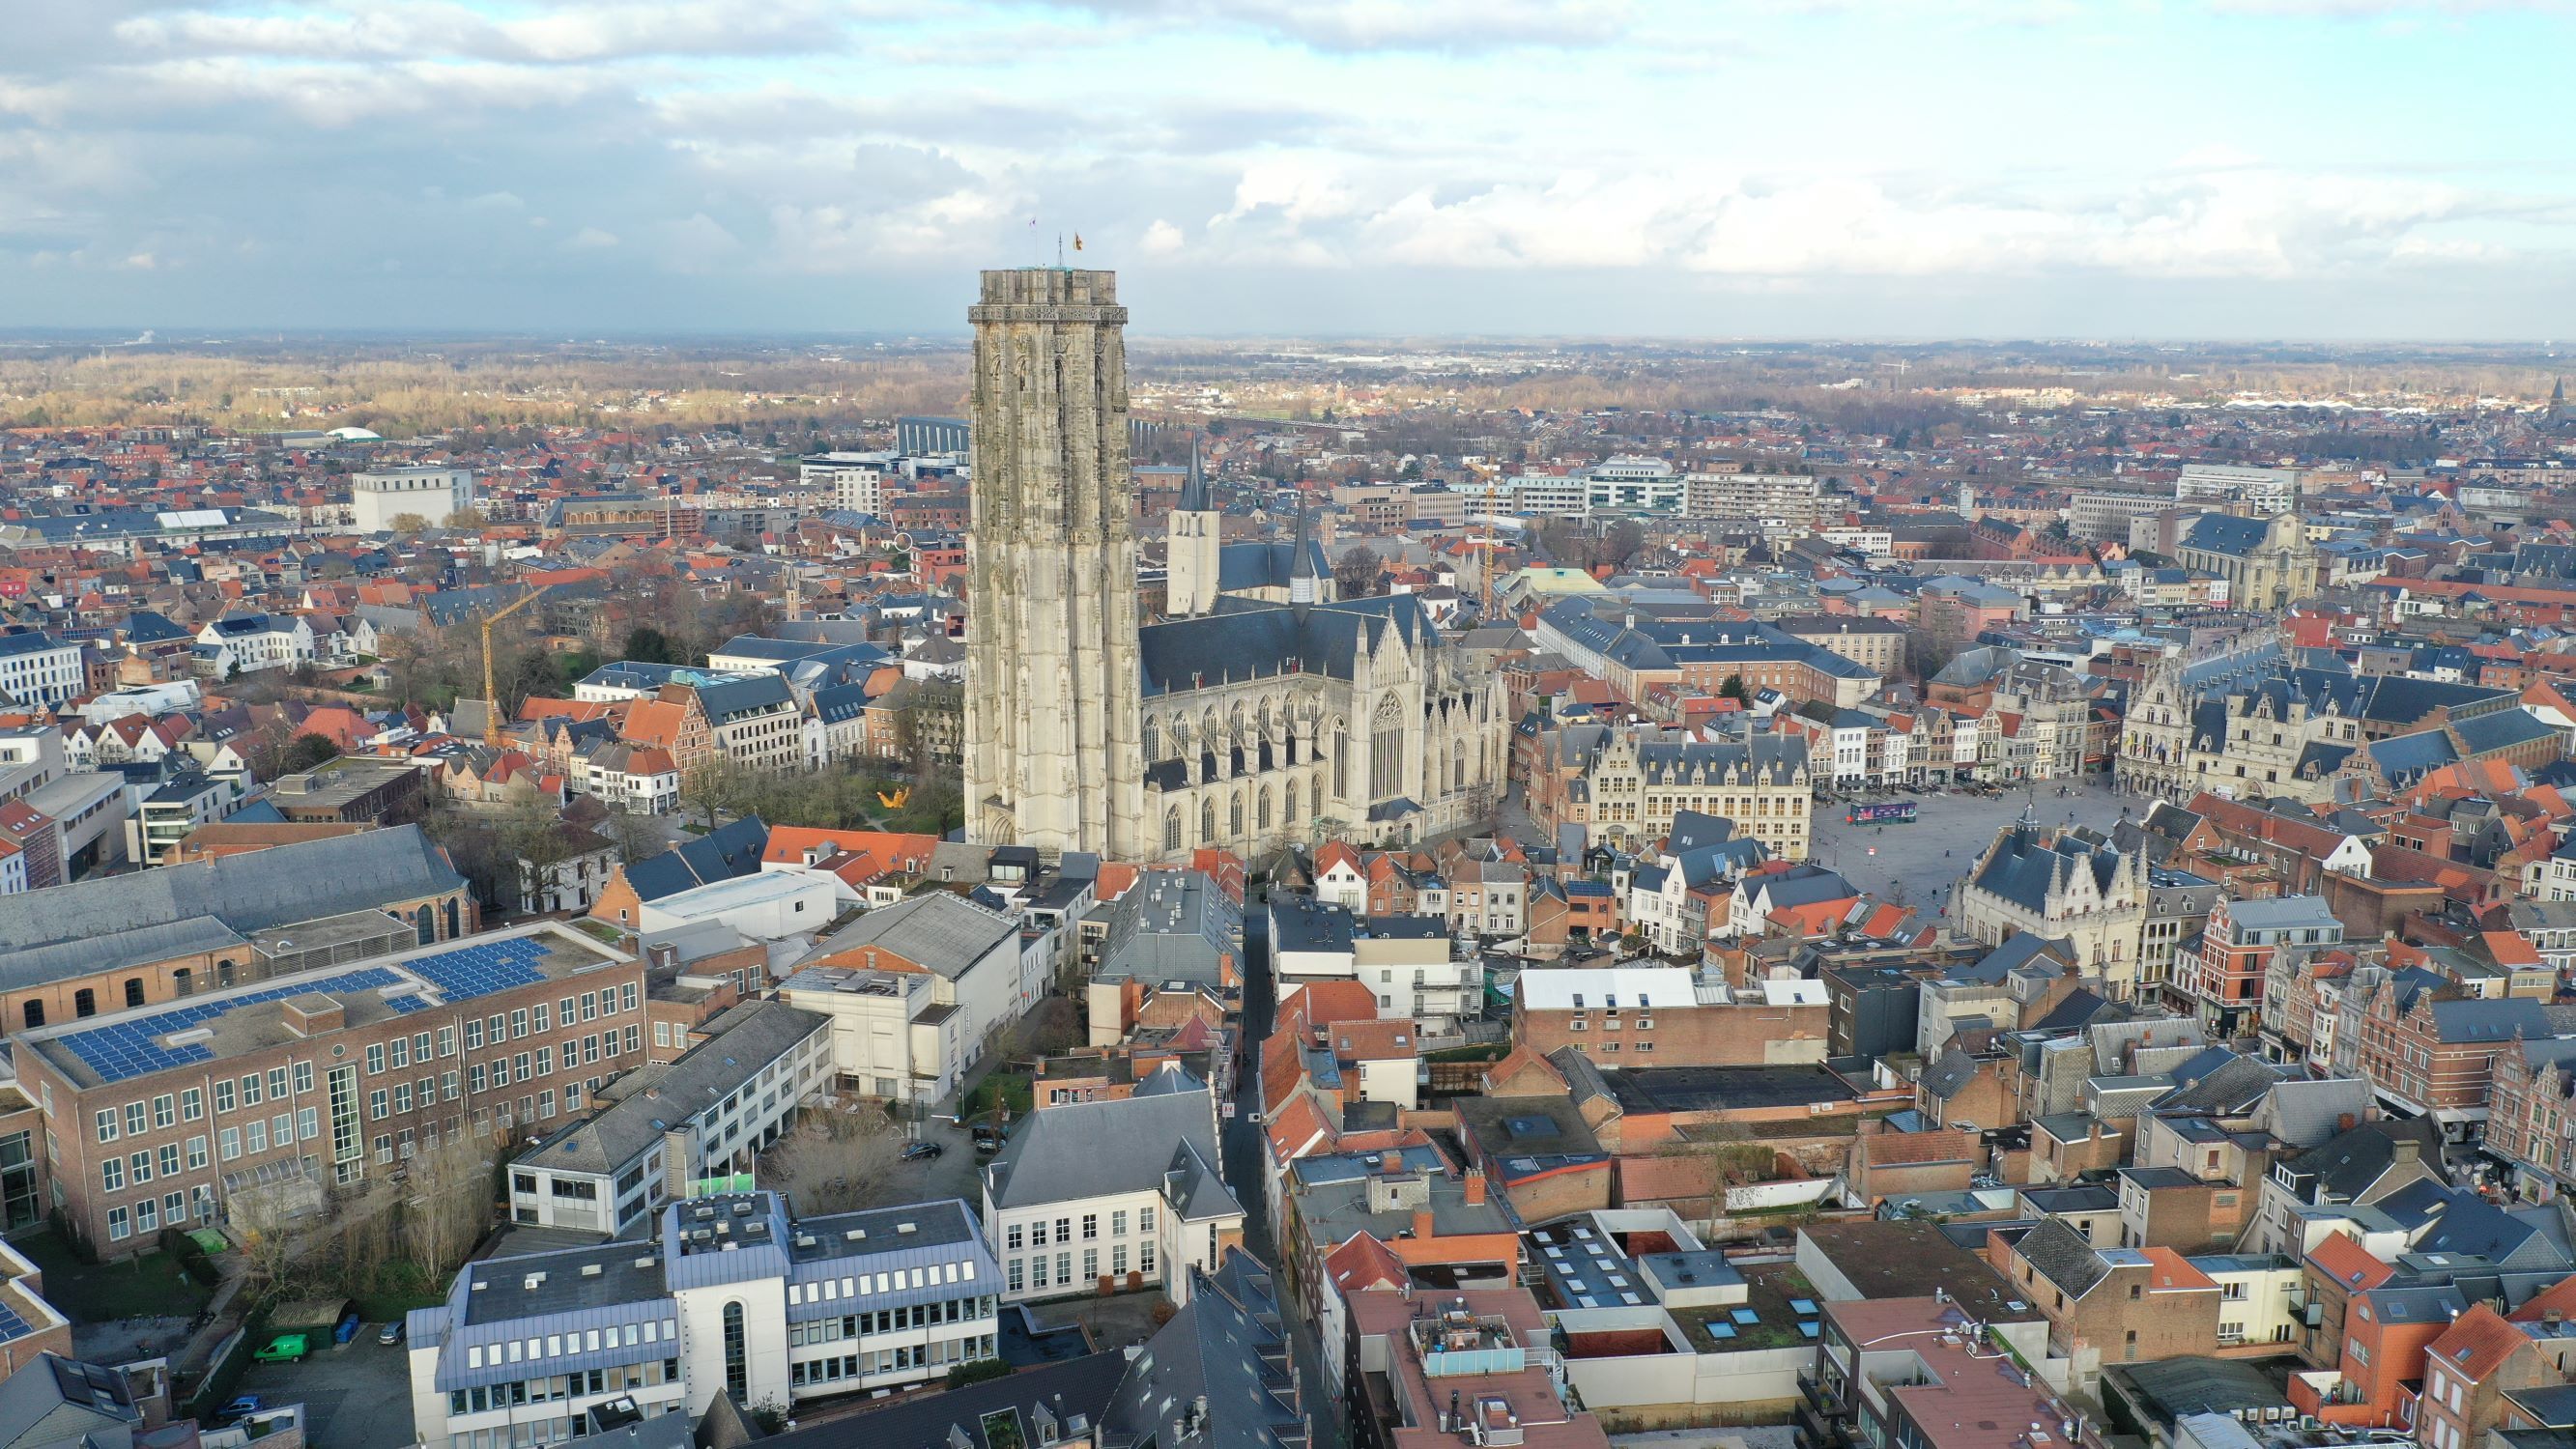 The tower of St. Rombouts Cathedral houses one of the greatest carillons in the world © Stad Mechelen